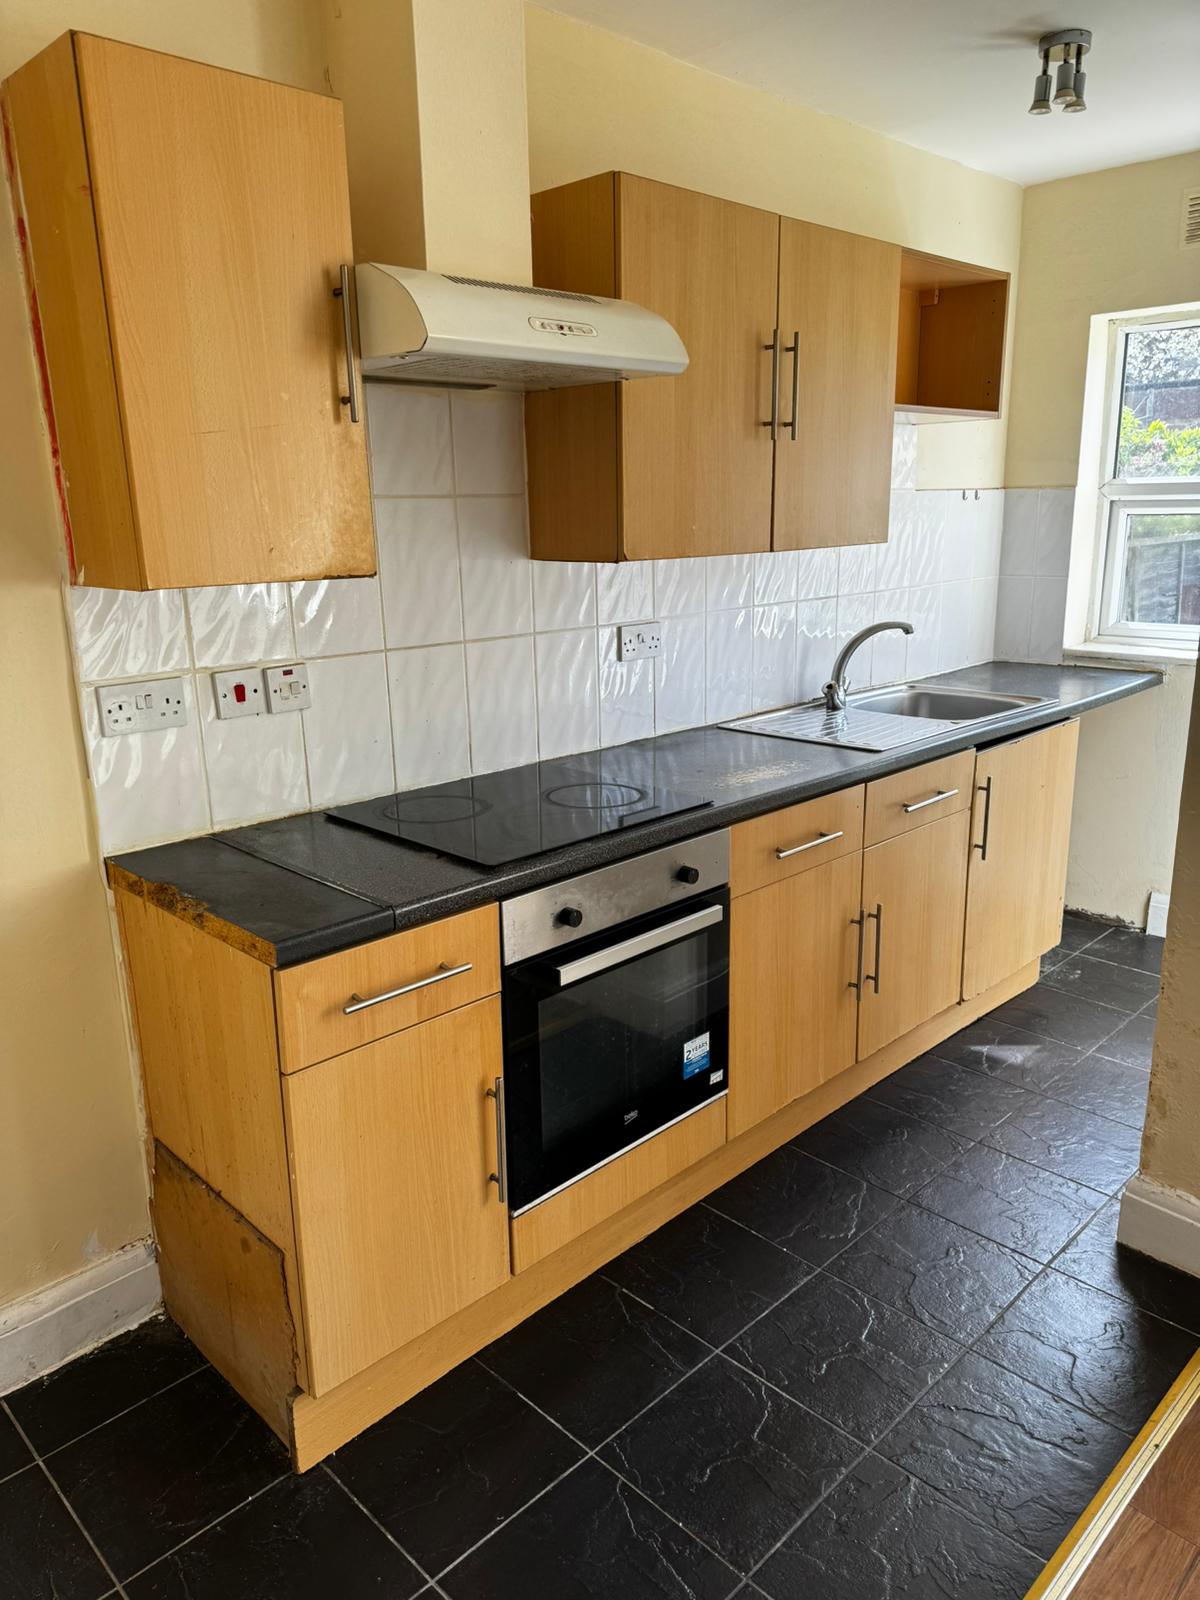 3 bed Apartment/Flat/Studio for rent in Ilford. From PropertyLoop